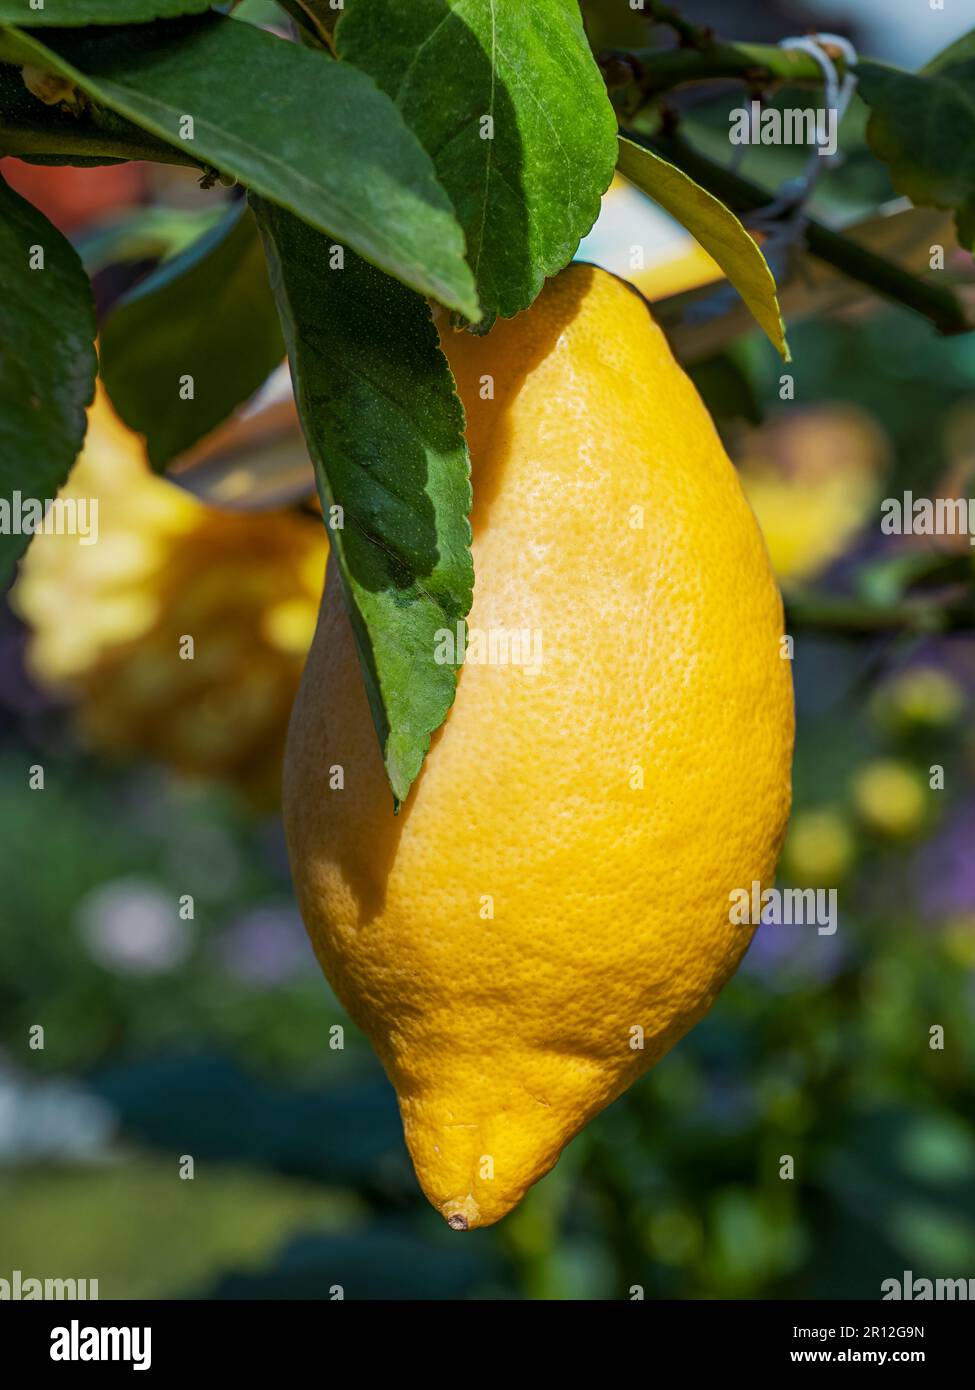 Close up of fresh lemon hanging from tree with leaves Stock Photo